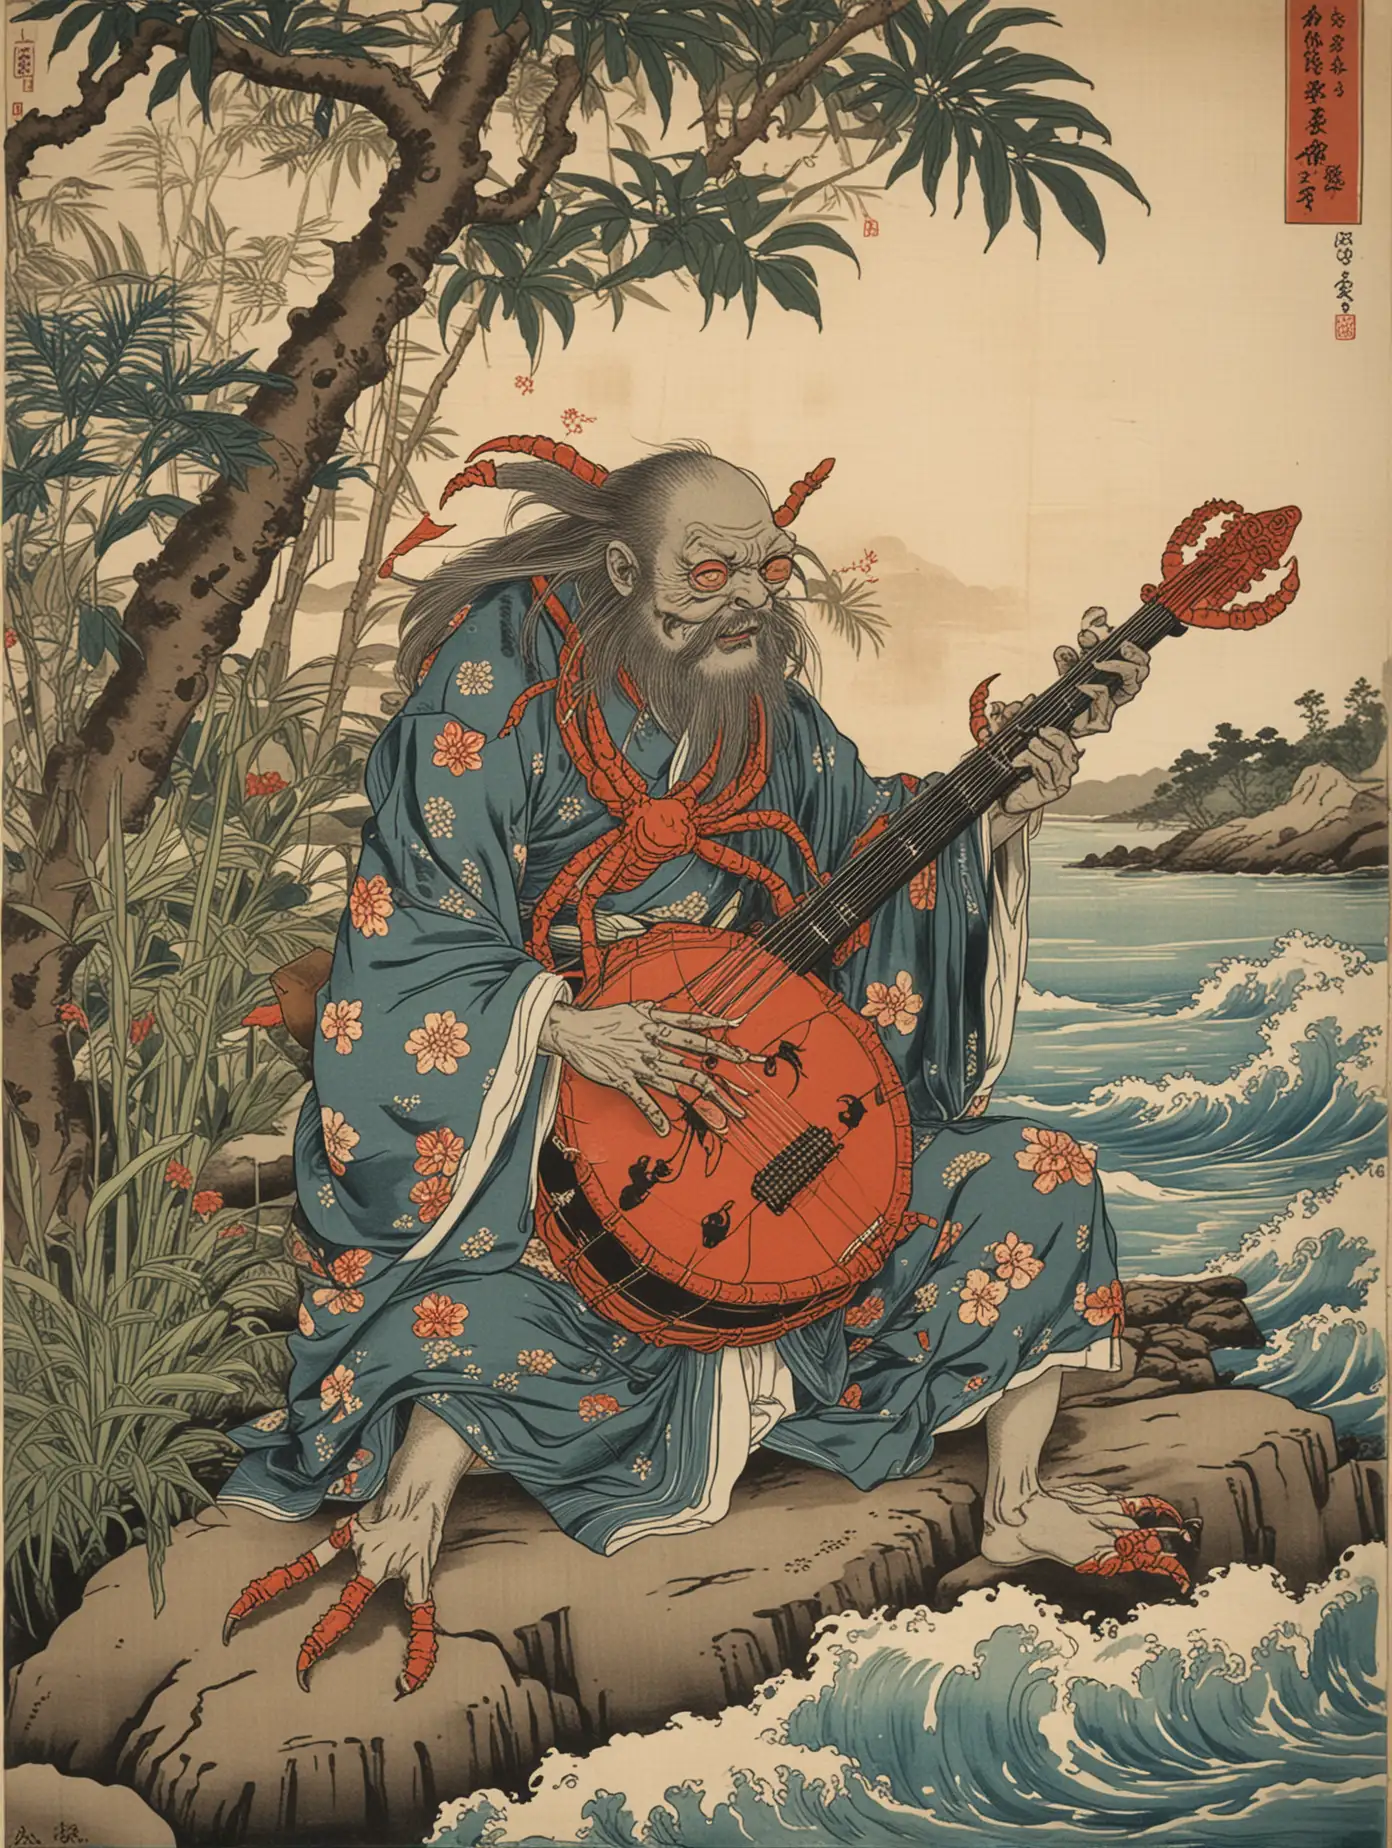 19th century Japanese ukiyoe block print, showing an athropomorphised giant crab, in a seated position, playing the shamisen, in a tropical setting, ukiyoe style